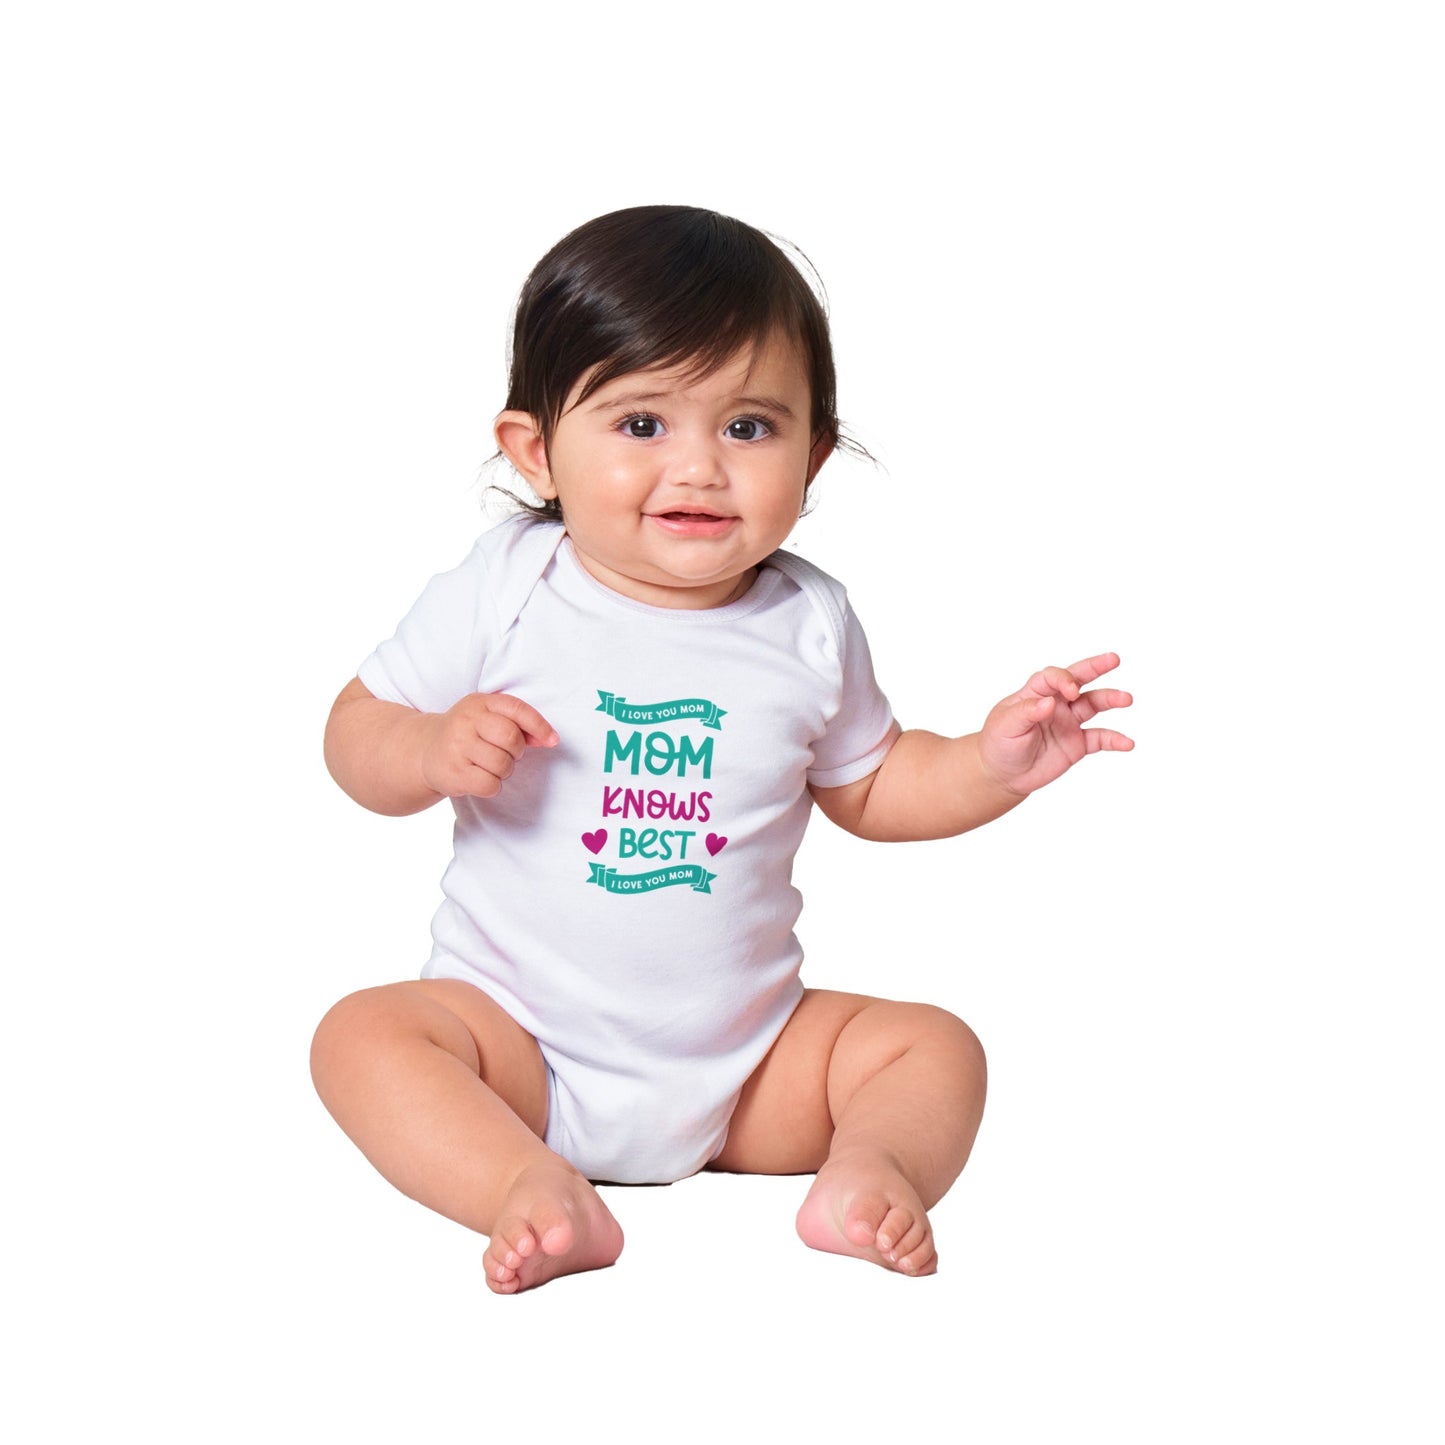 Classic Baby Short Sleeve Bodysuit Mom knows best